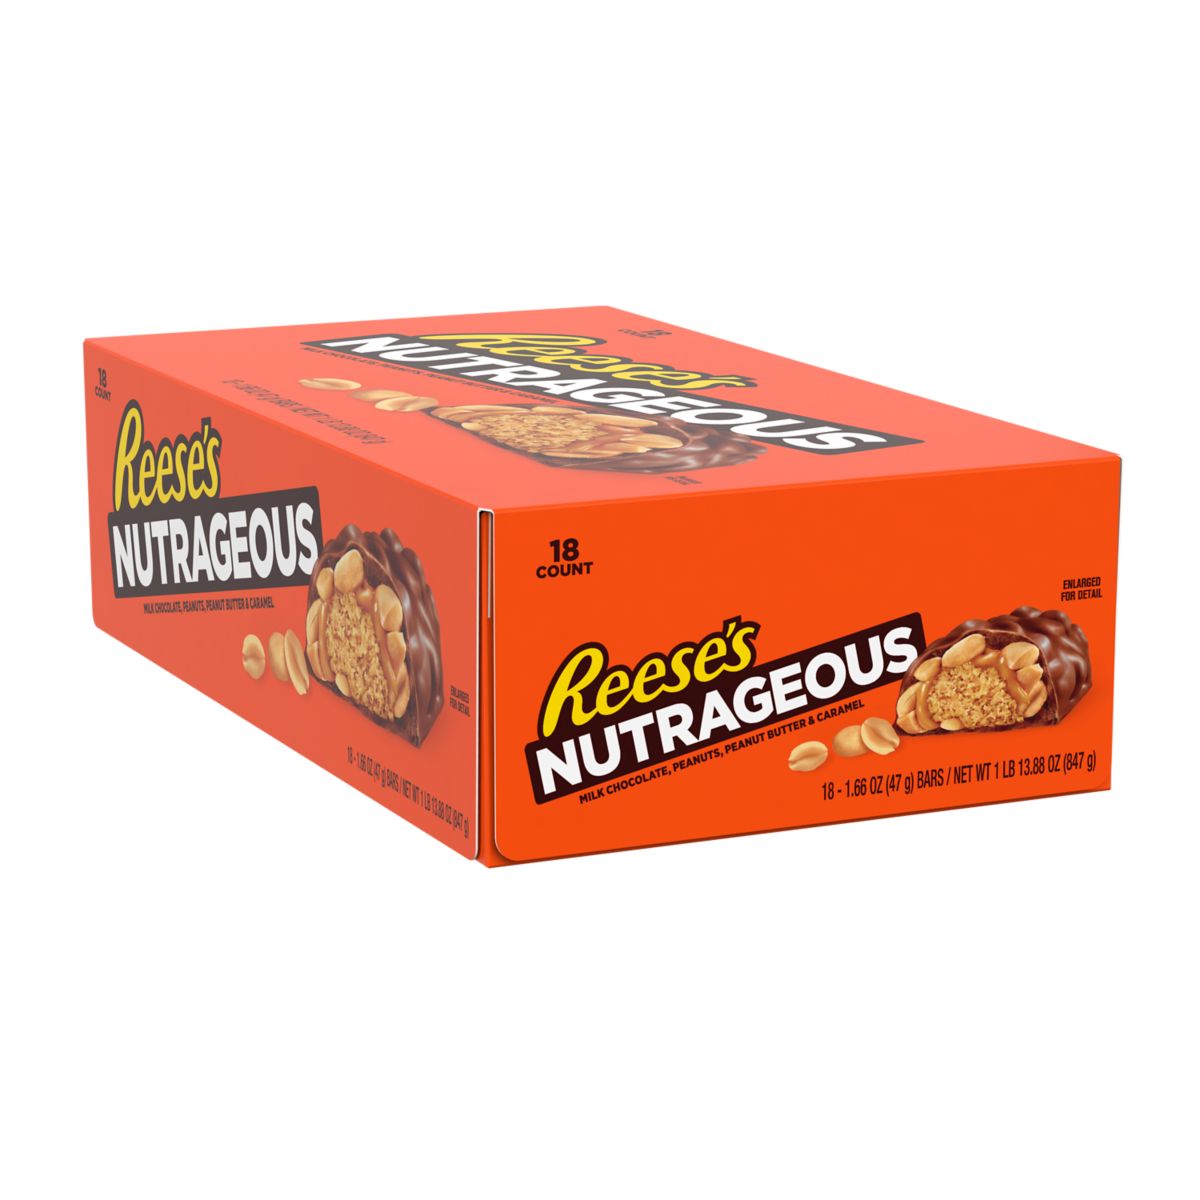 REESE'S NUTRAGEOUS